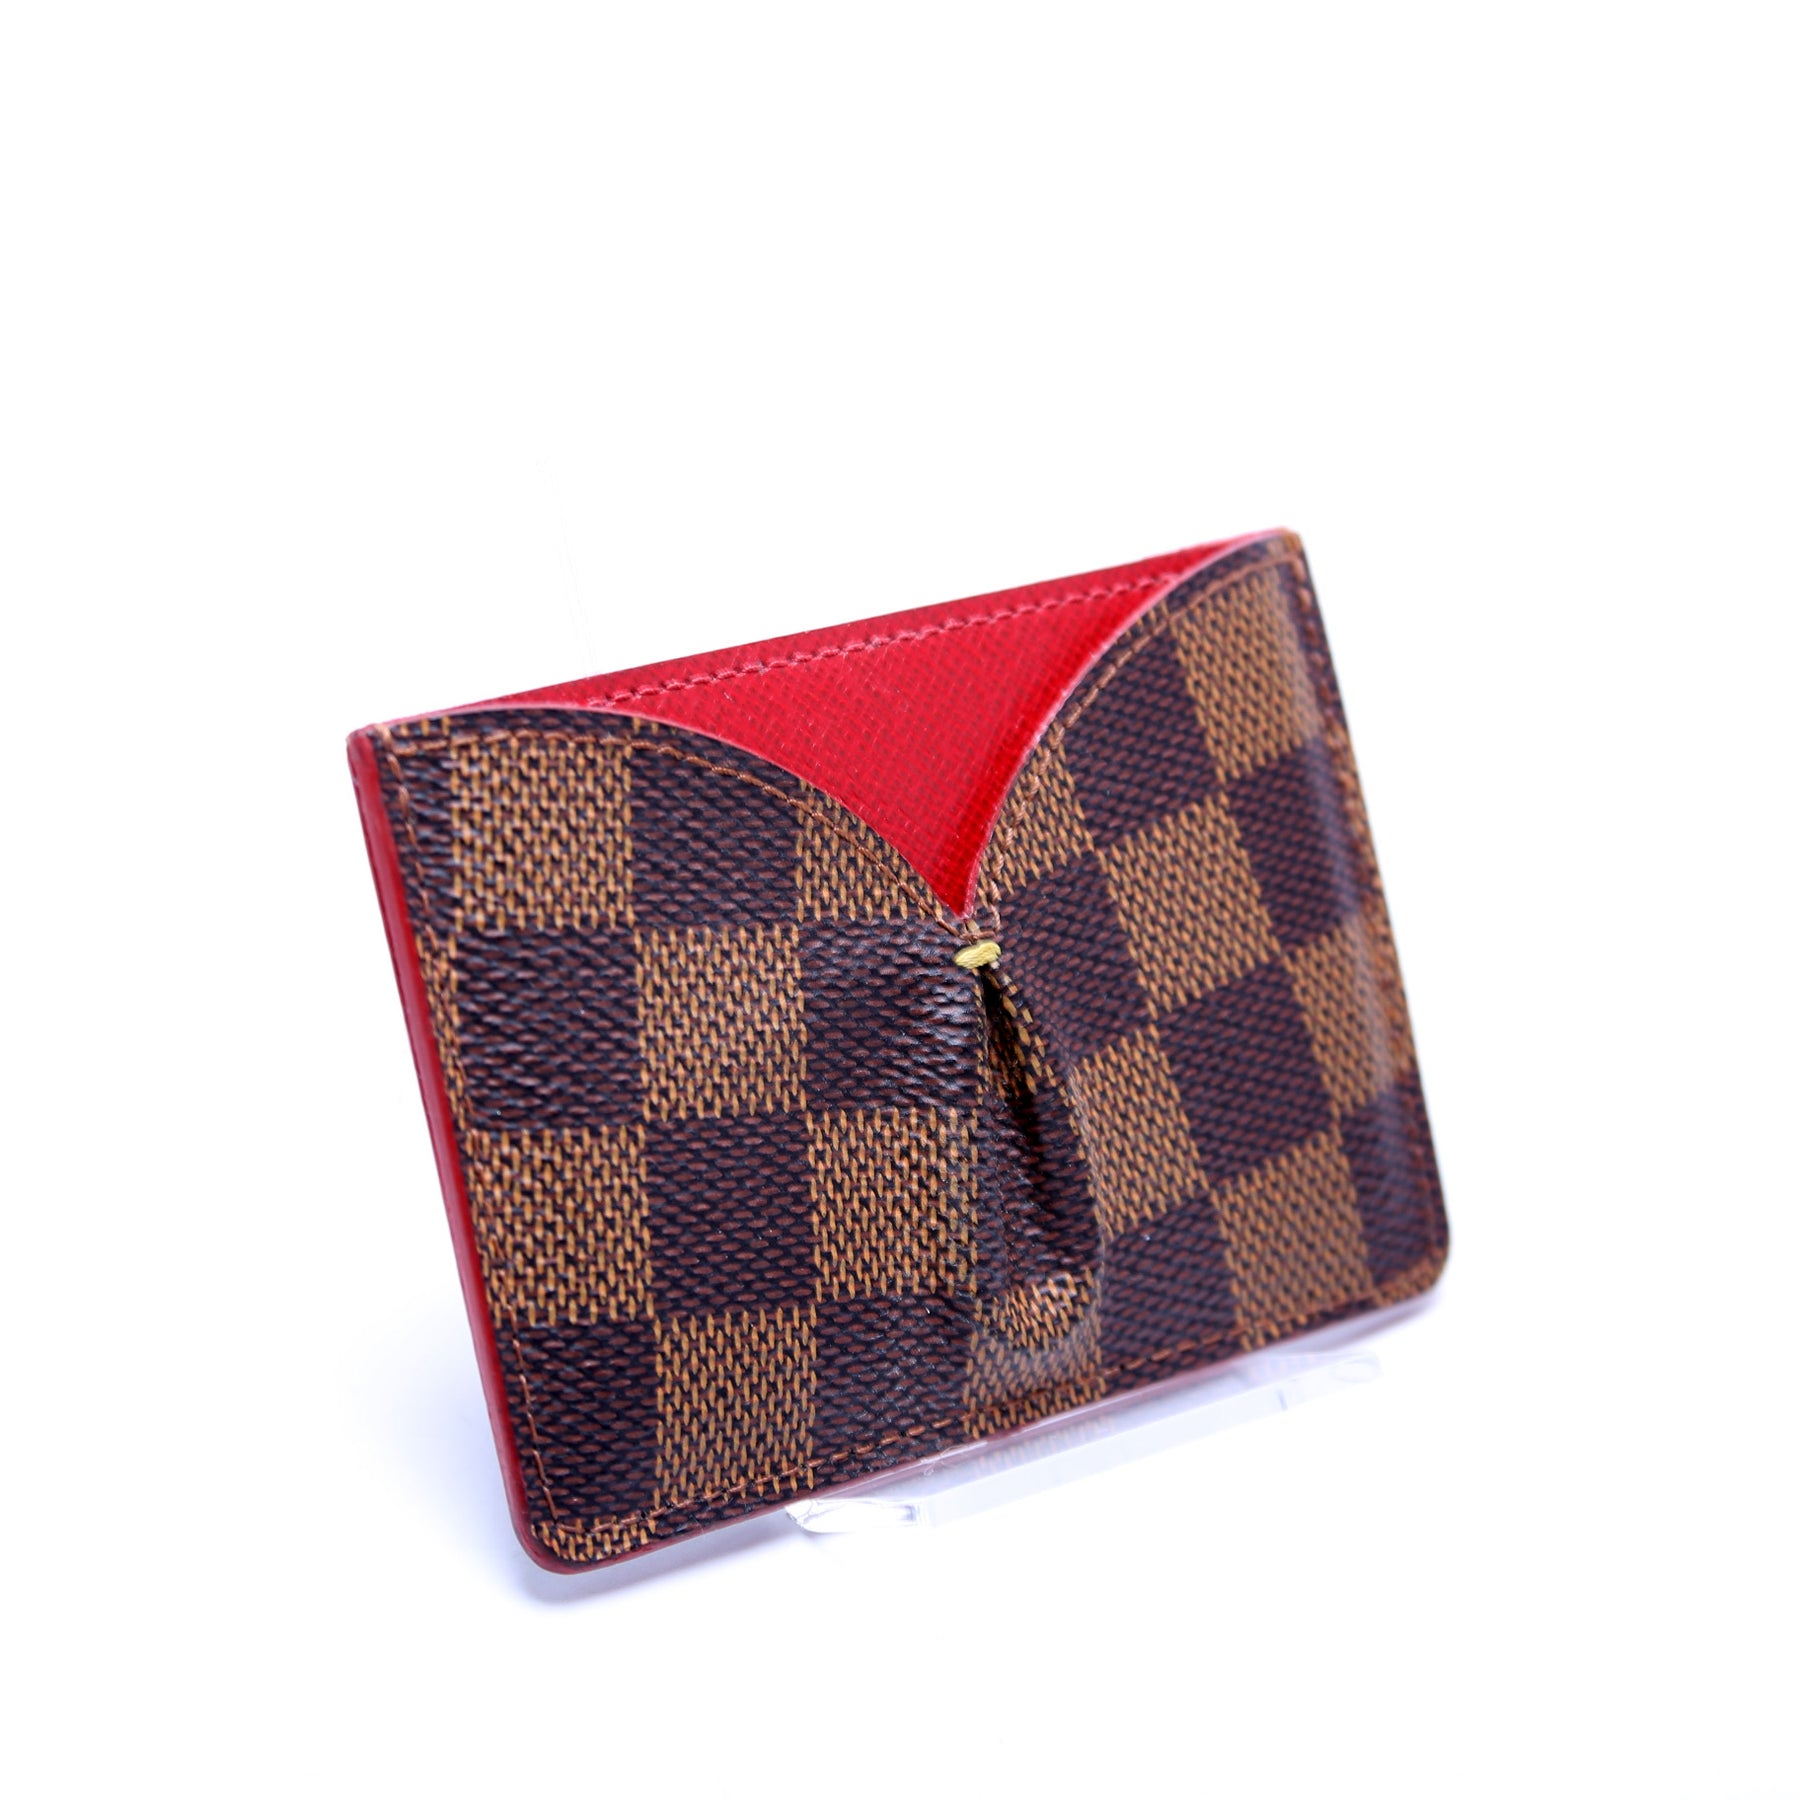 Louis Vuitton Caissa Card Holder Review & In store experience – danetigress